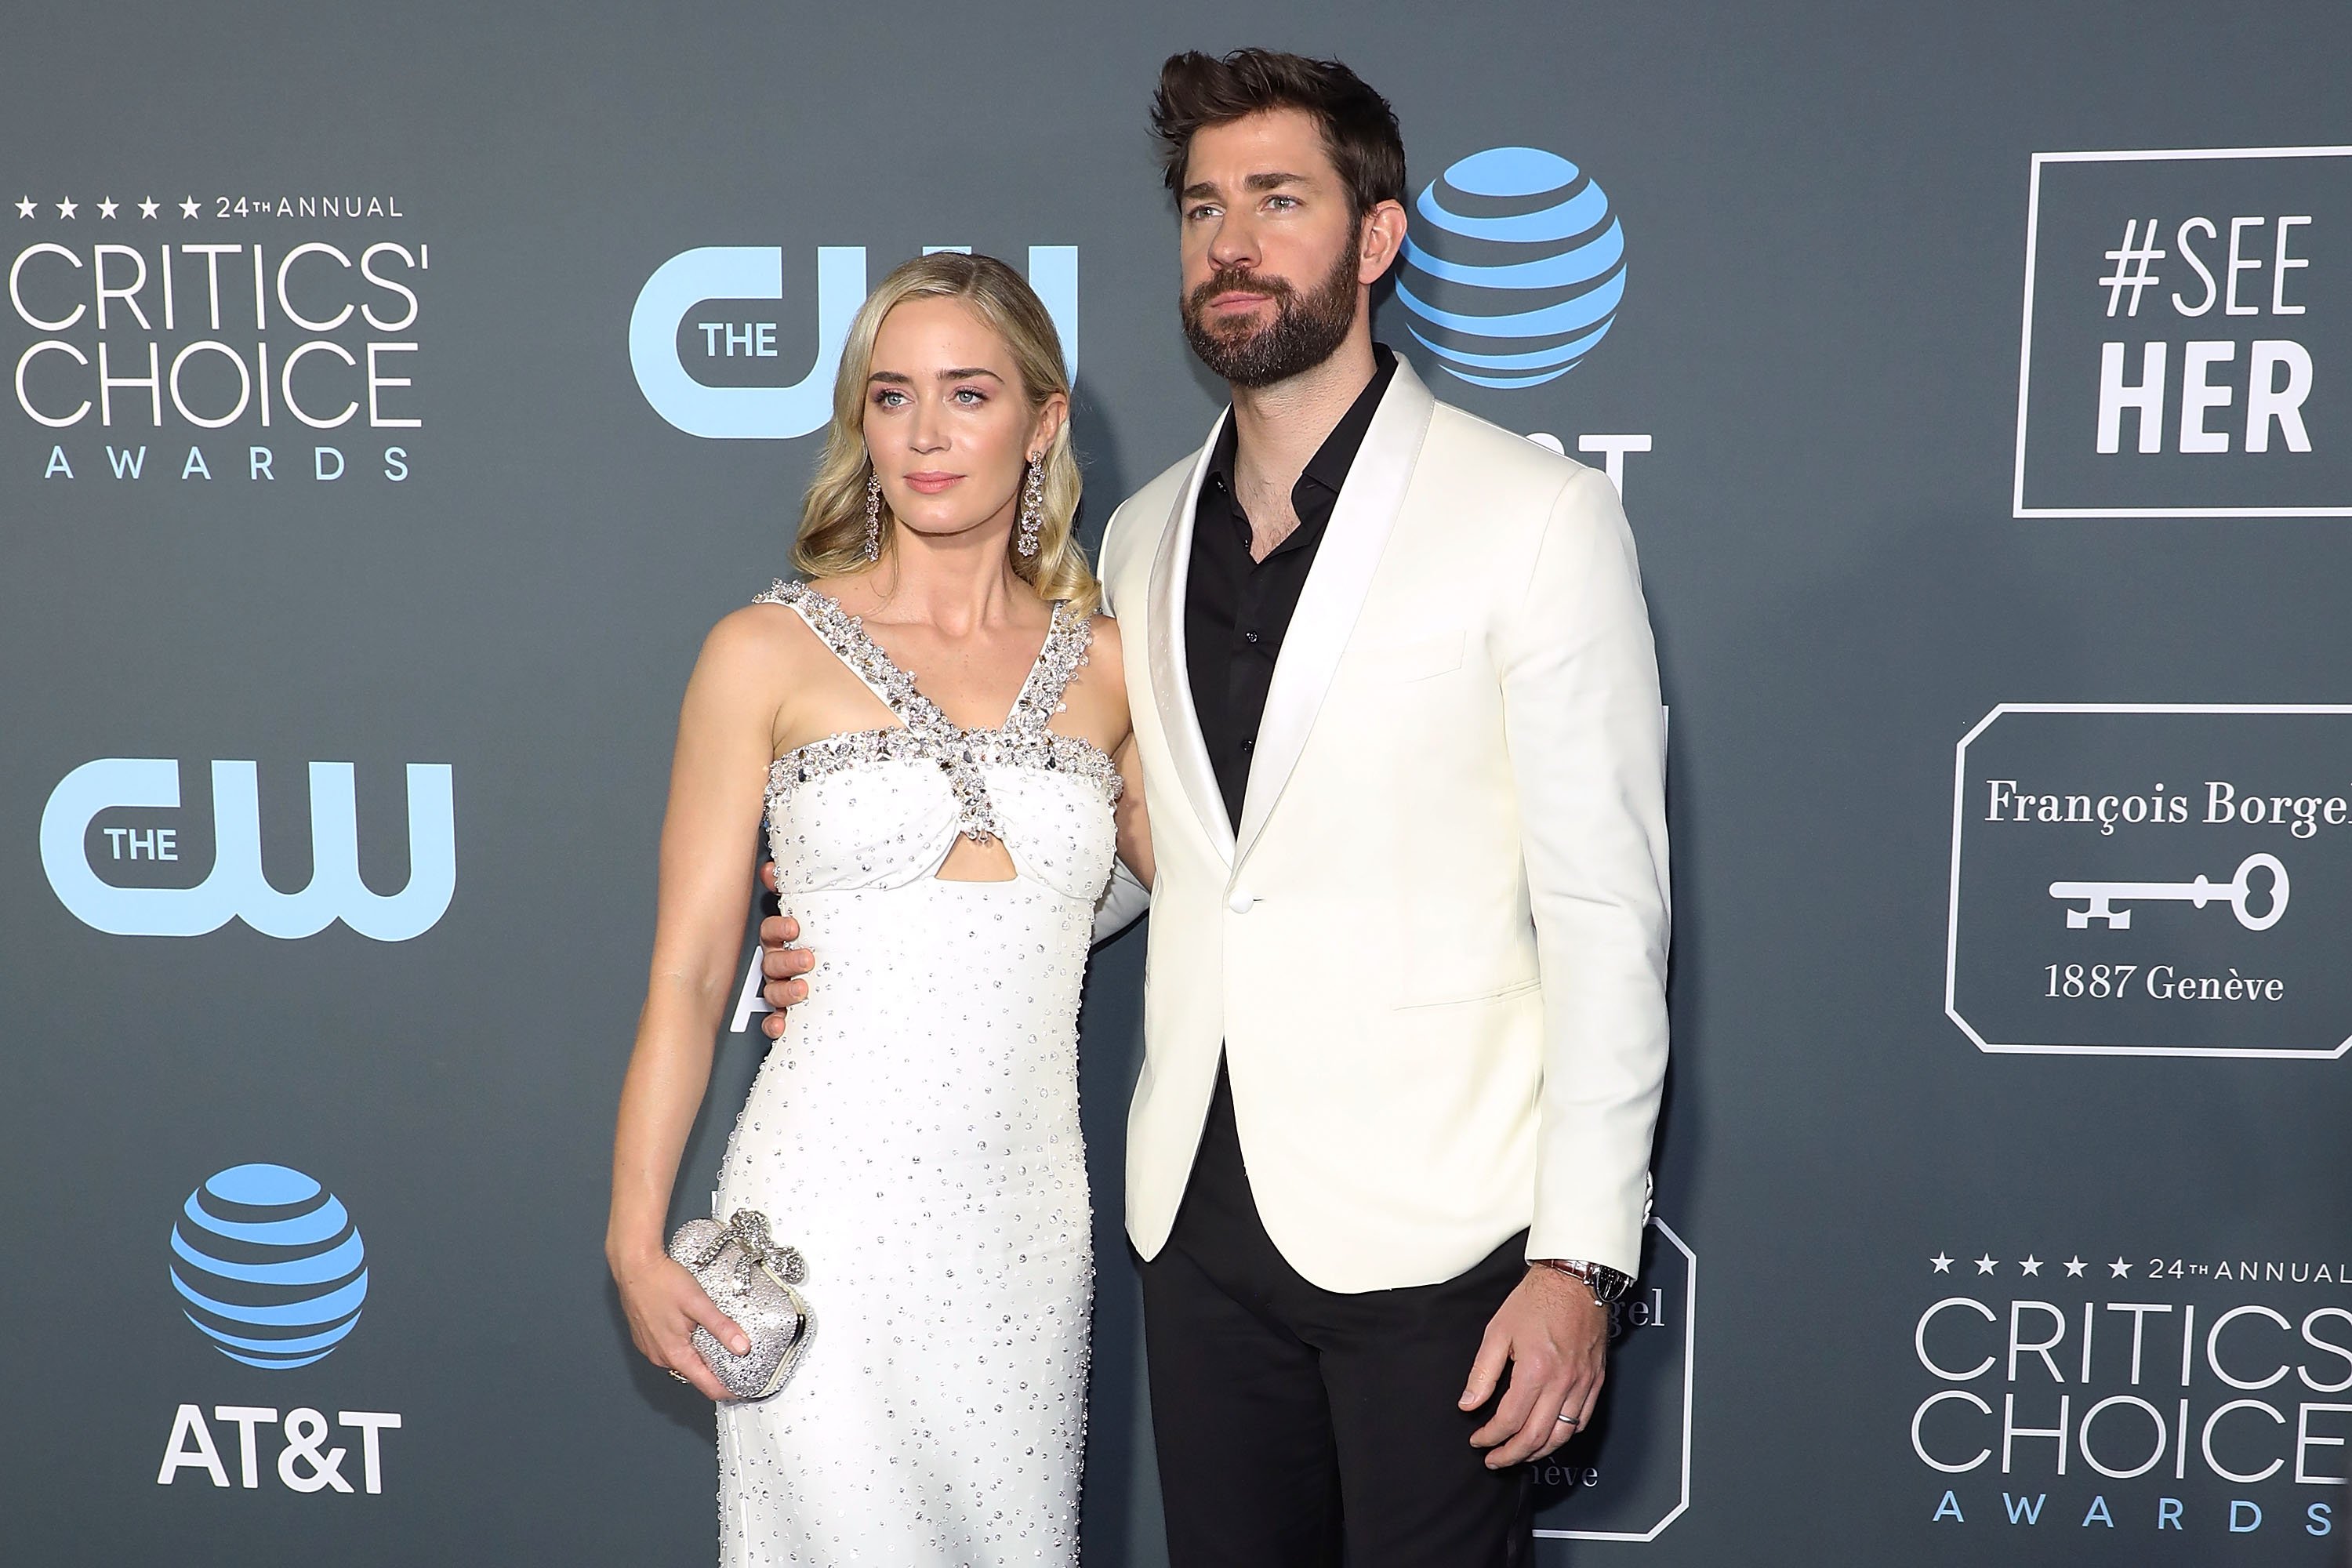 Emily Blunt and John Krasinski at the 24th Annual Critics' Choice Awards on January 13, 2019, in Santa Monica | Source: Getty Images